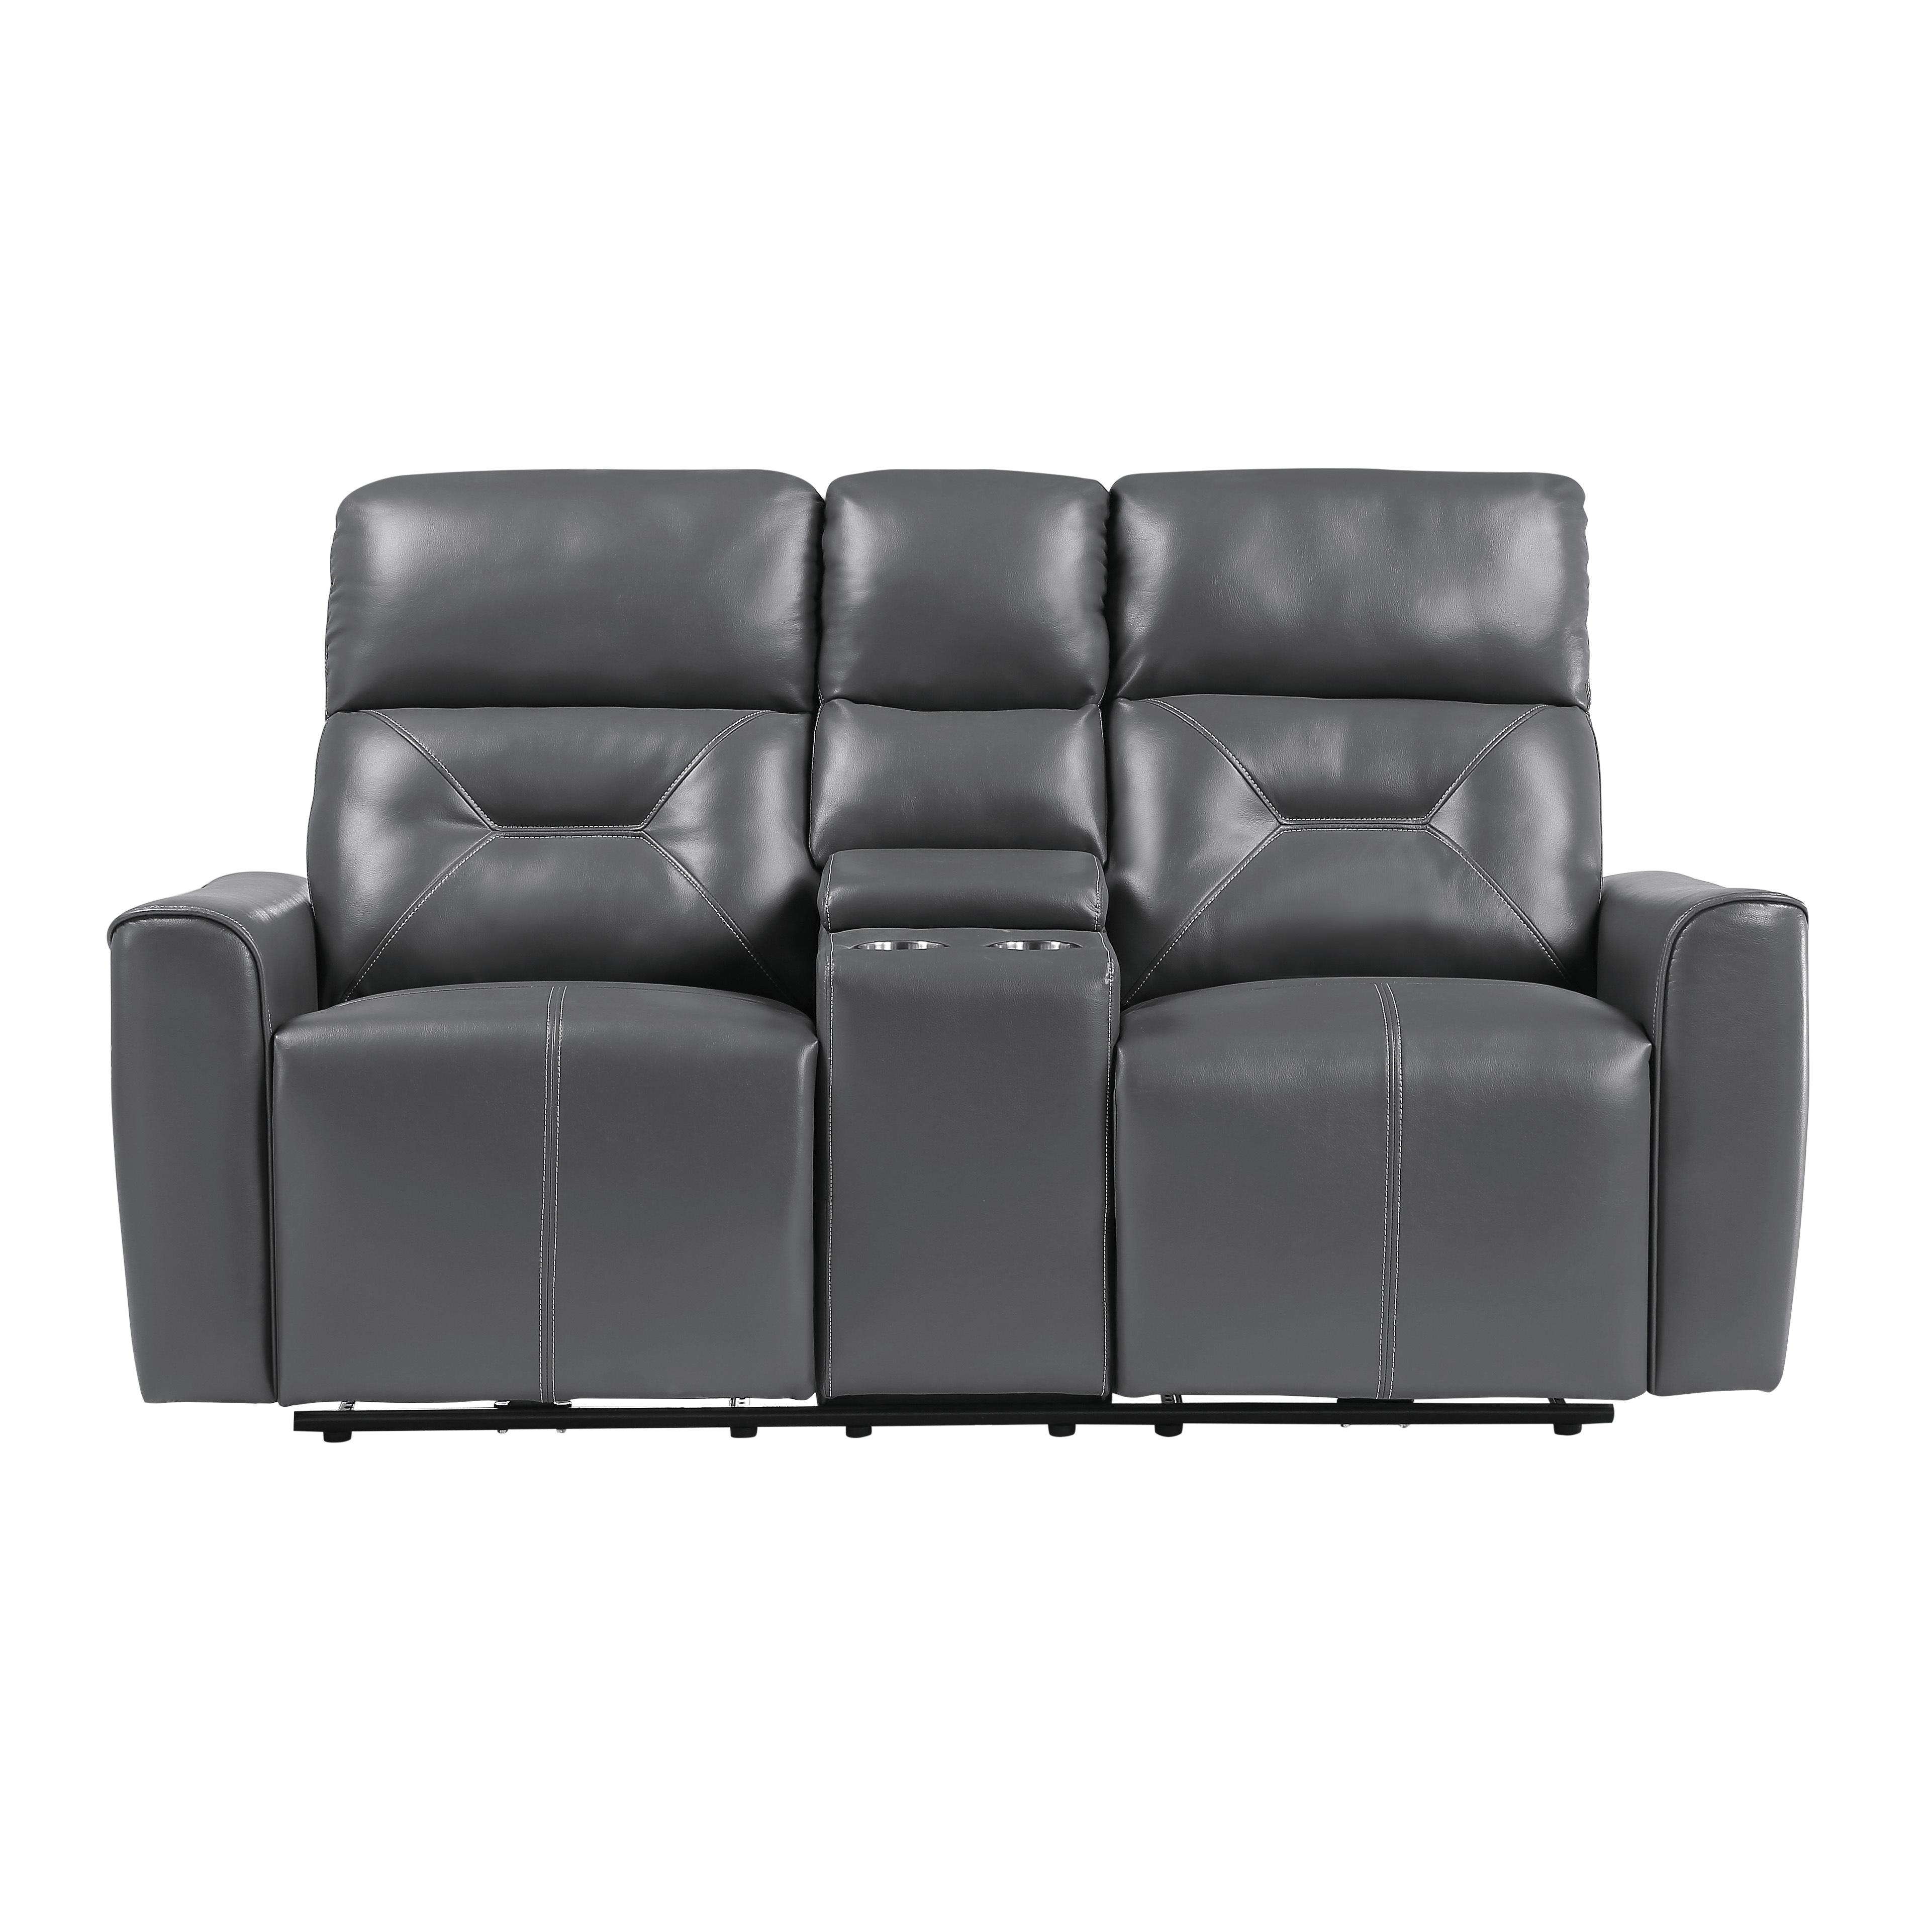 Modern Power Reclining Loveseat 9446GY-2PW Burwell 9446GY-2PW in Dark Gray Faux Leather